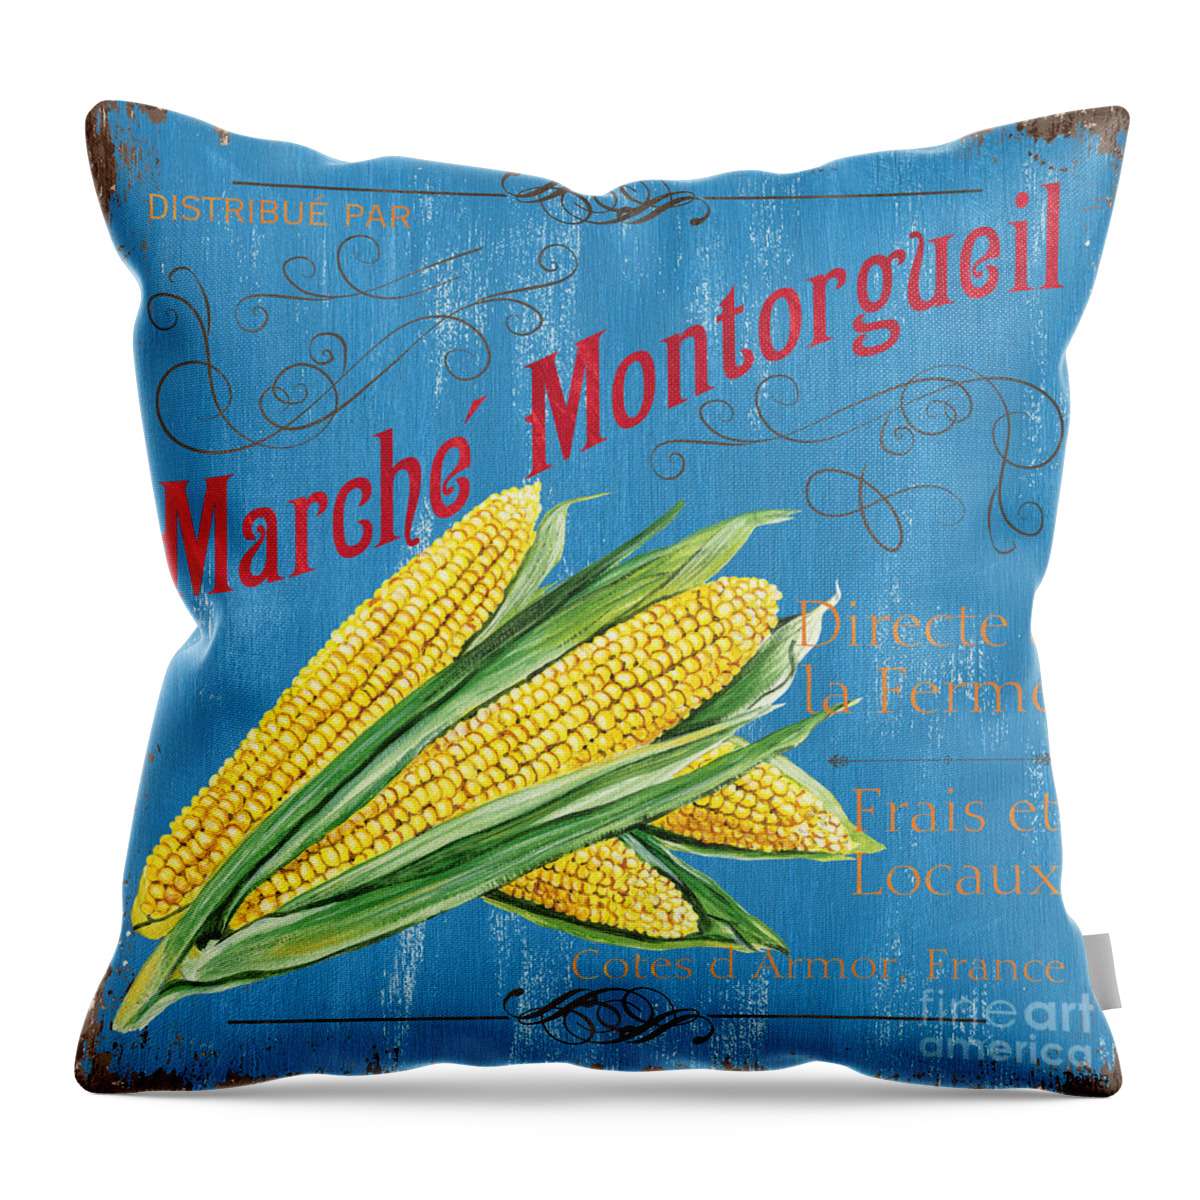 Market Throw Pillow featuring the painting French Market Sign 2 by Debbie DeWitt